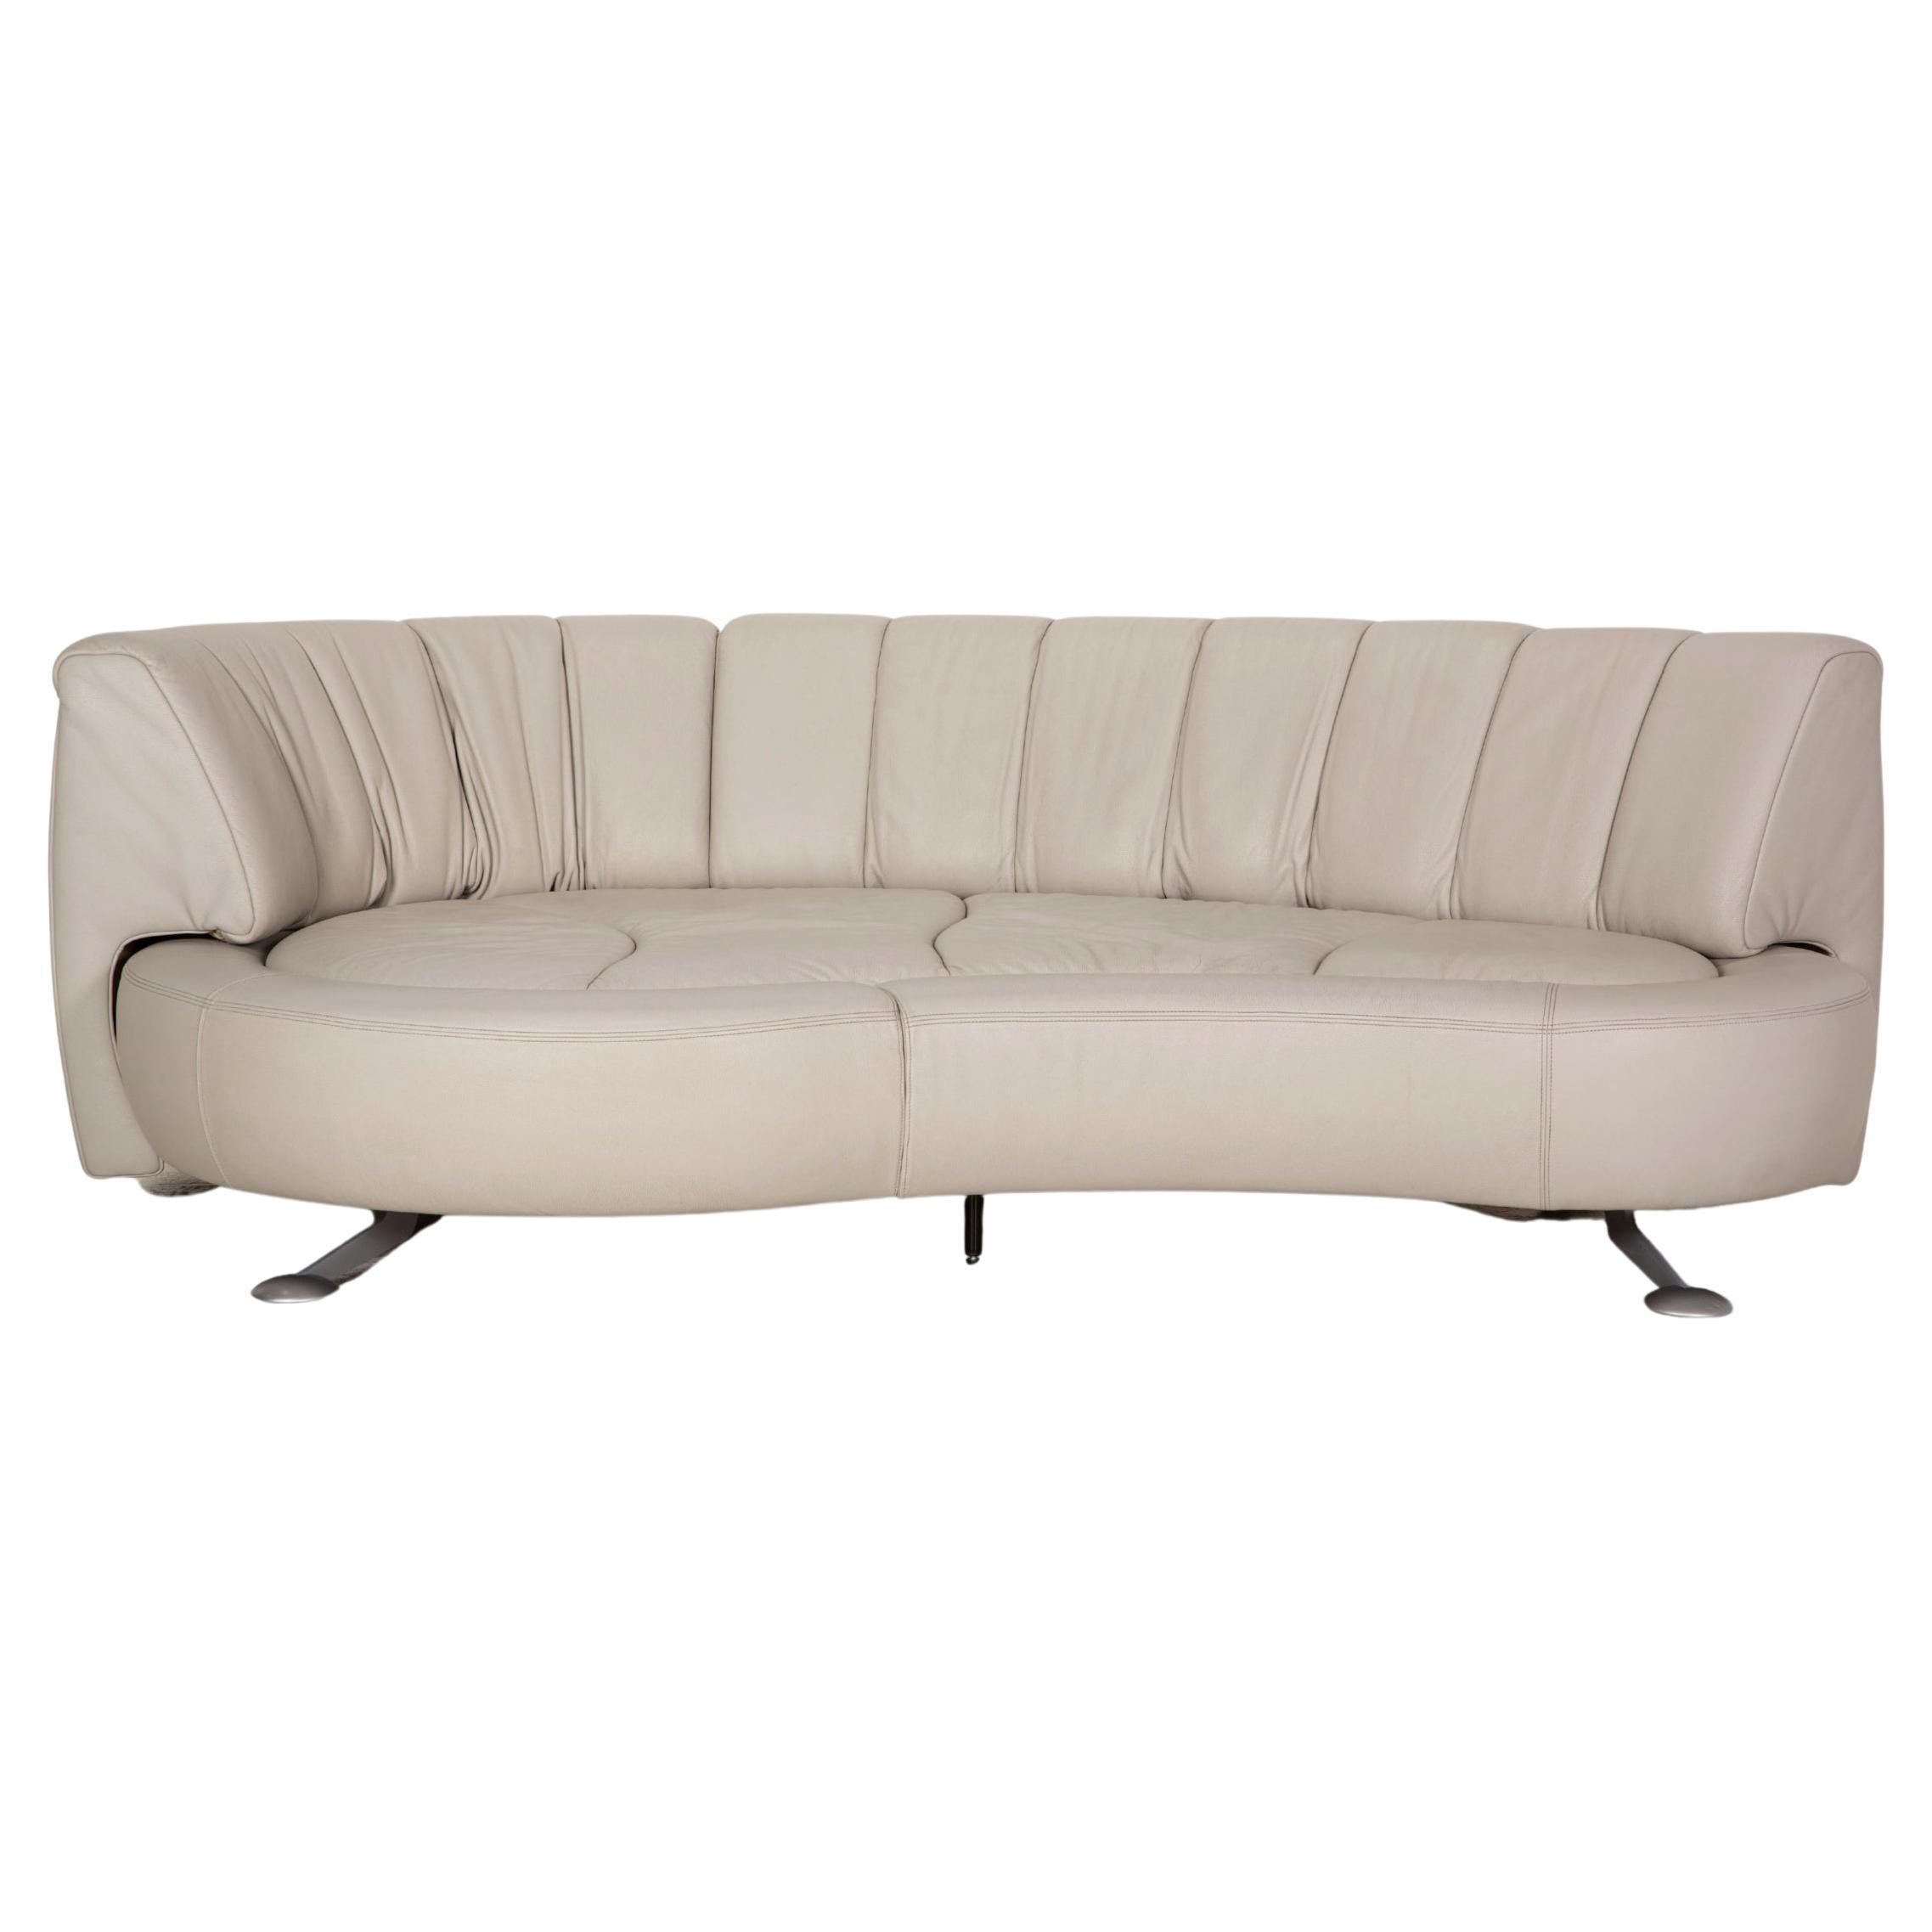 De Sede DS 164 Leather Sofa Light Gray Three-Seater Couch Function